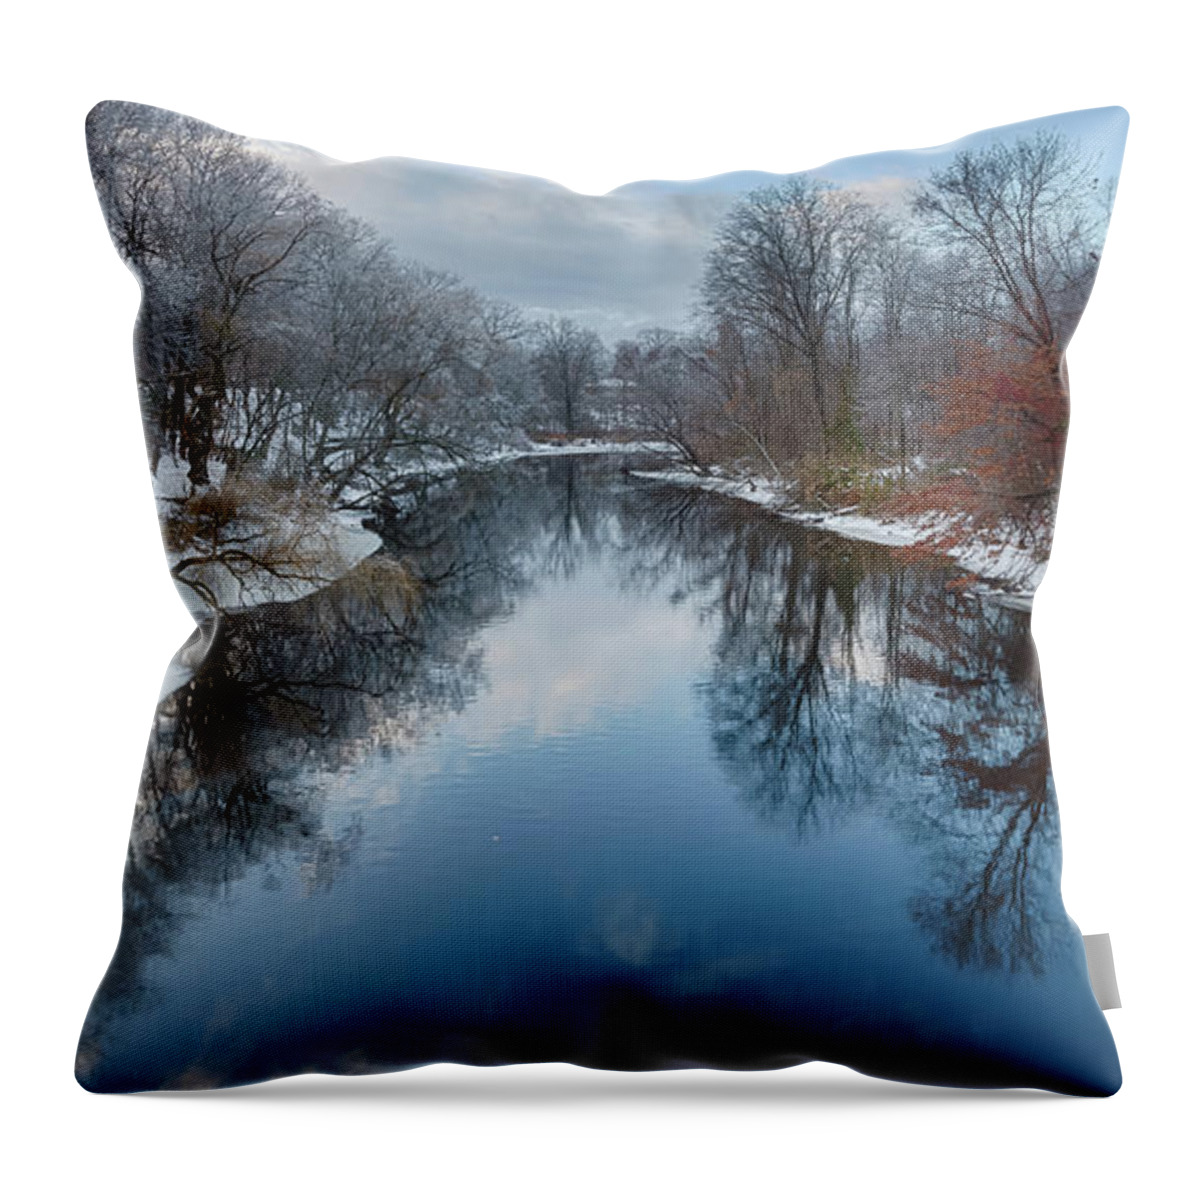 Scenics Throw Pillow featuring the photograph Mill River. New England Winter Scene by Enzo Figueres